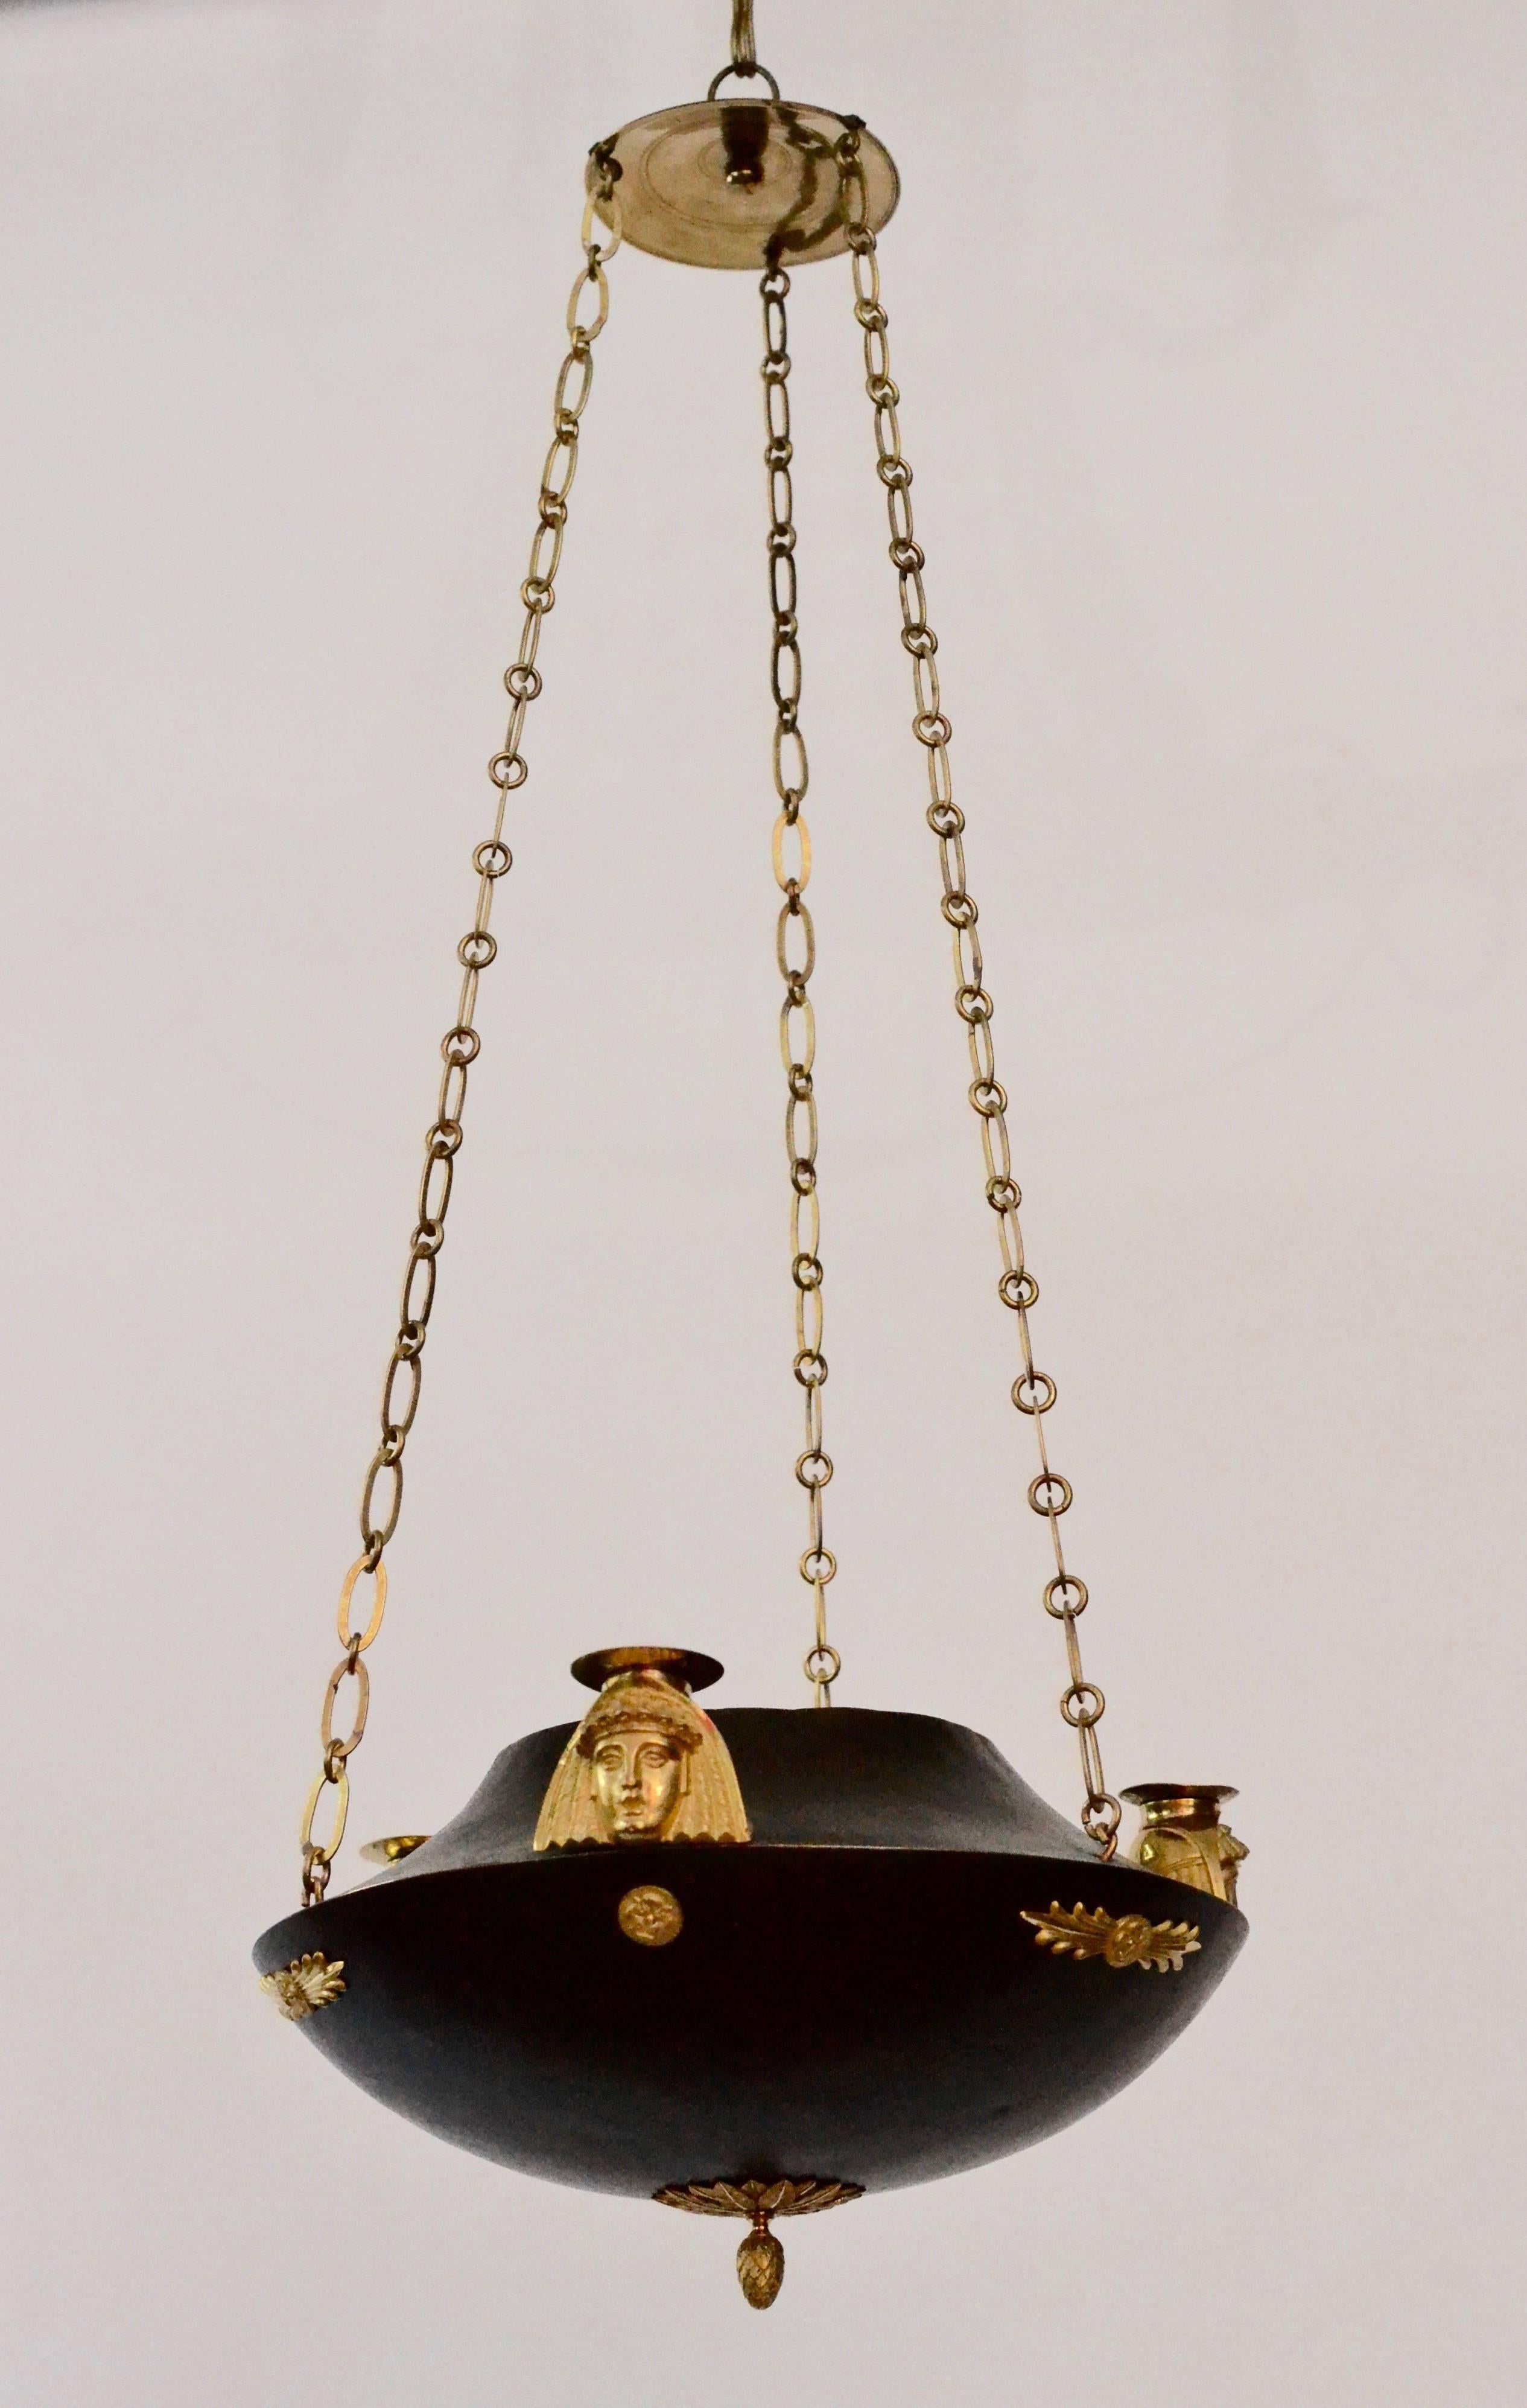 An unusual patinated and gilt bronze Swedish chandelier in the Egyptian style, circa 1810.